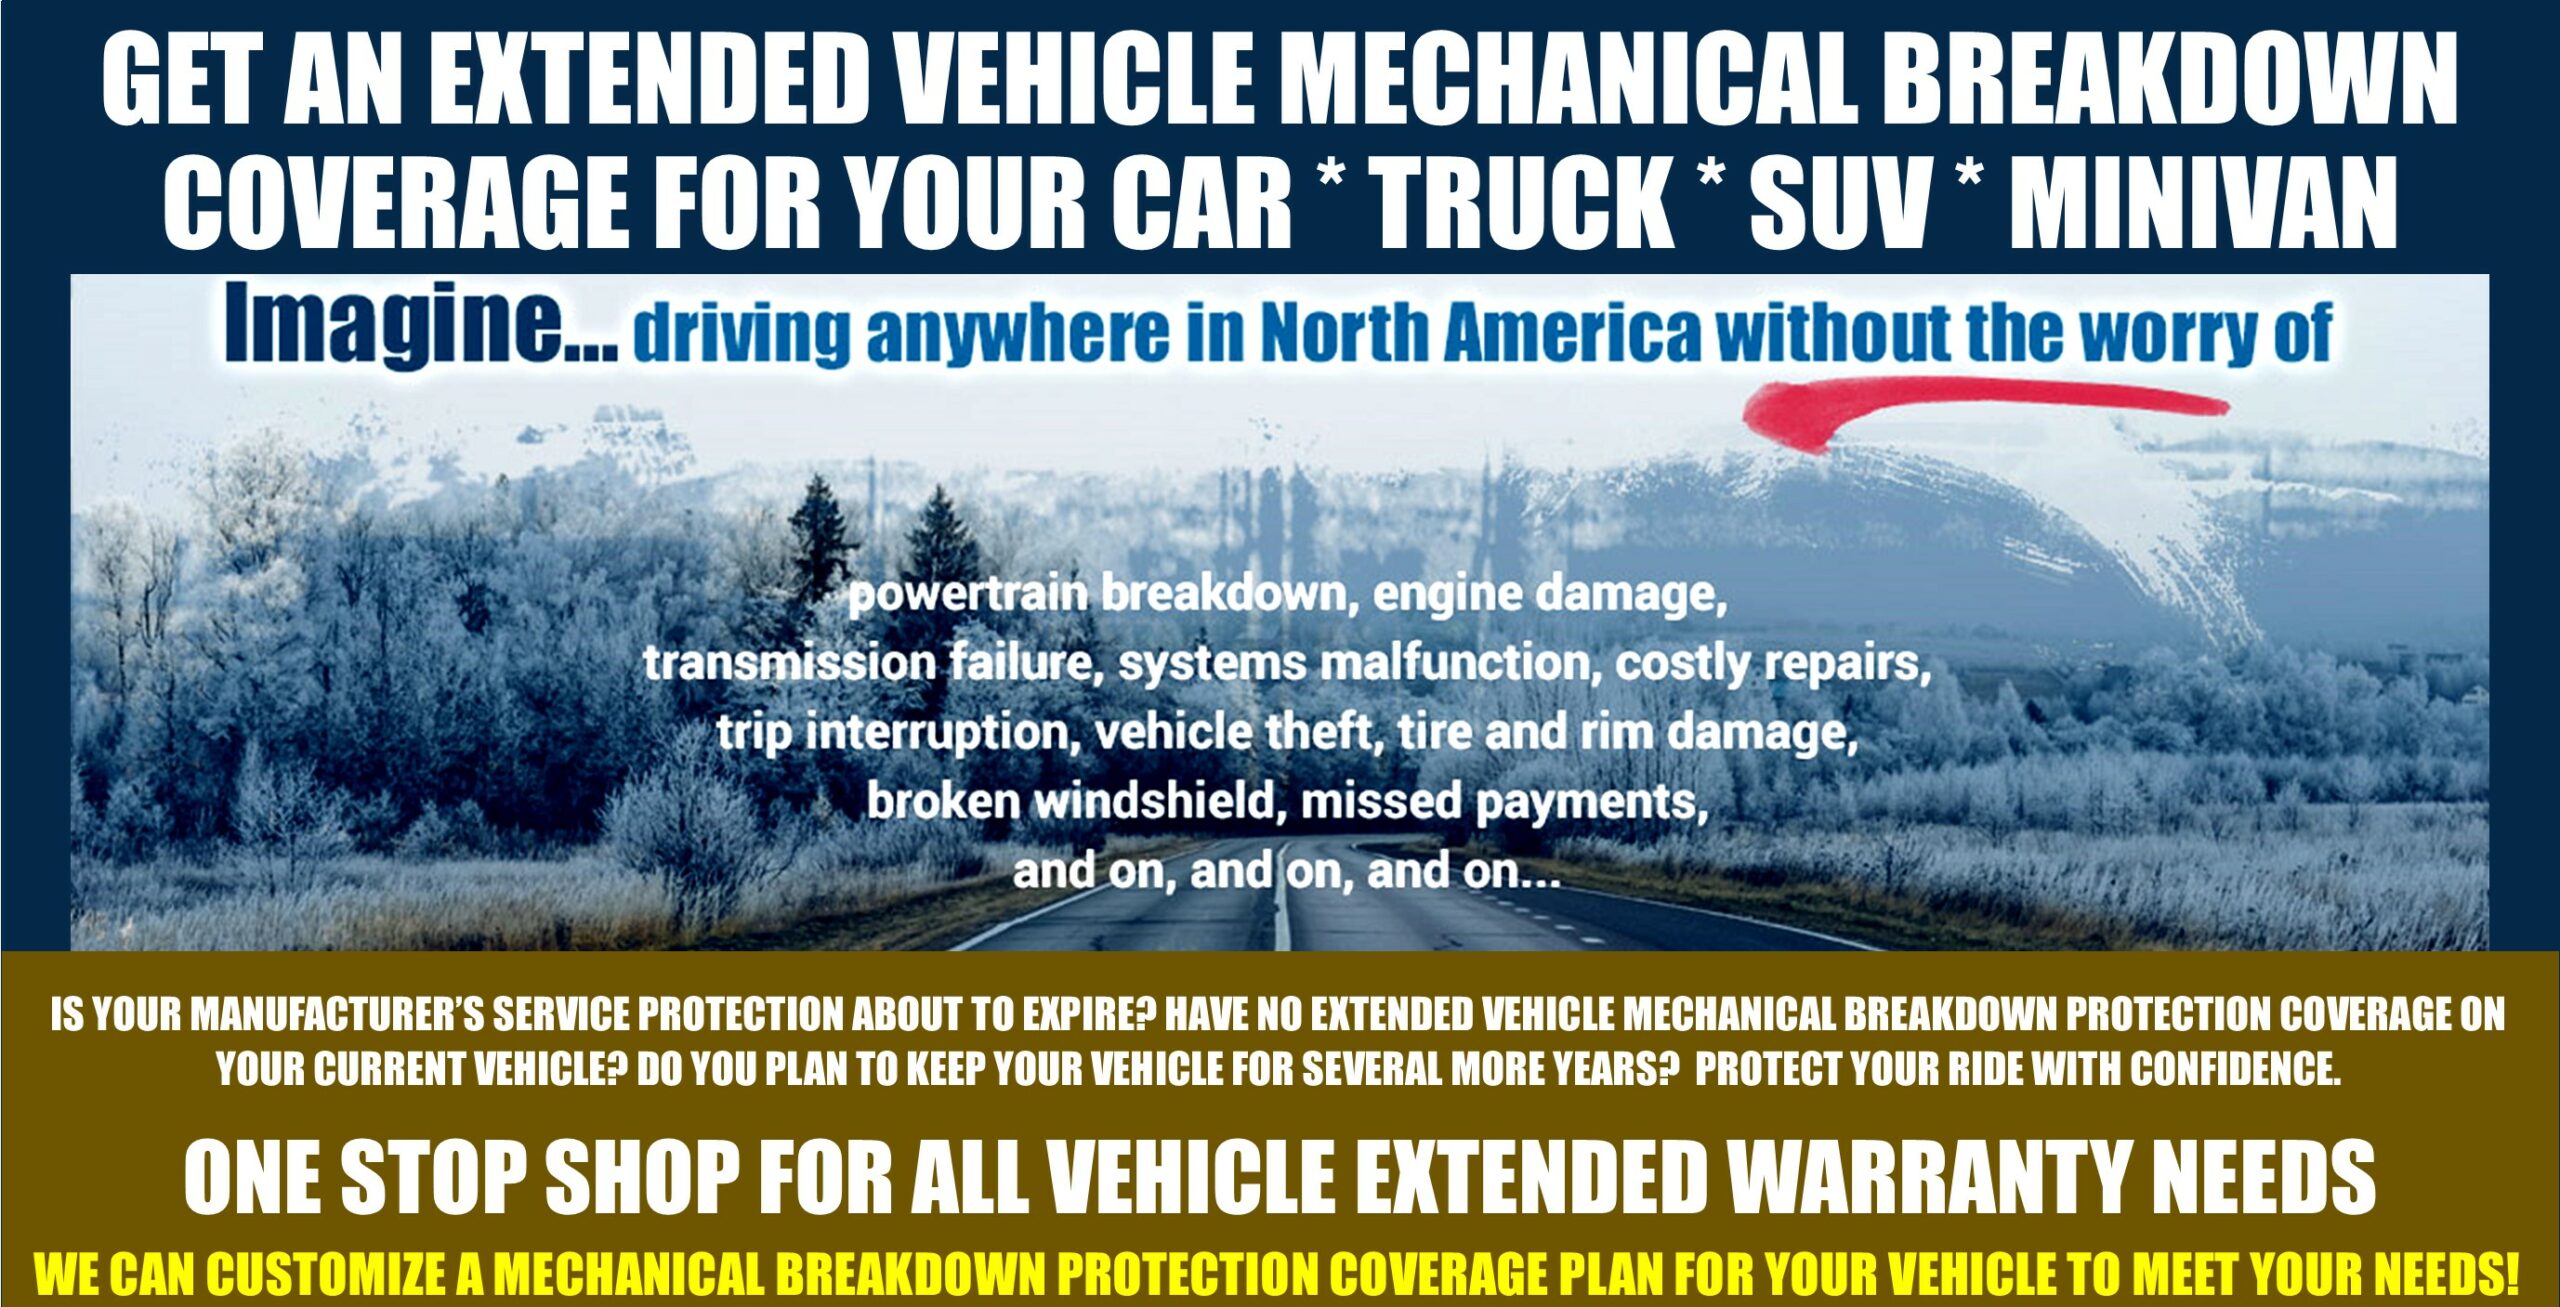 get an extended vehicle warranty for your vehicle.